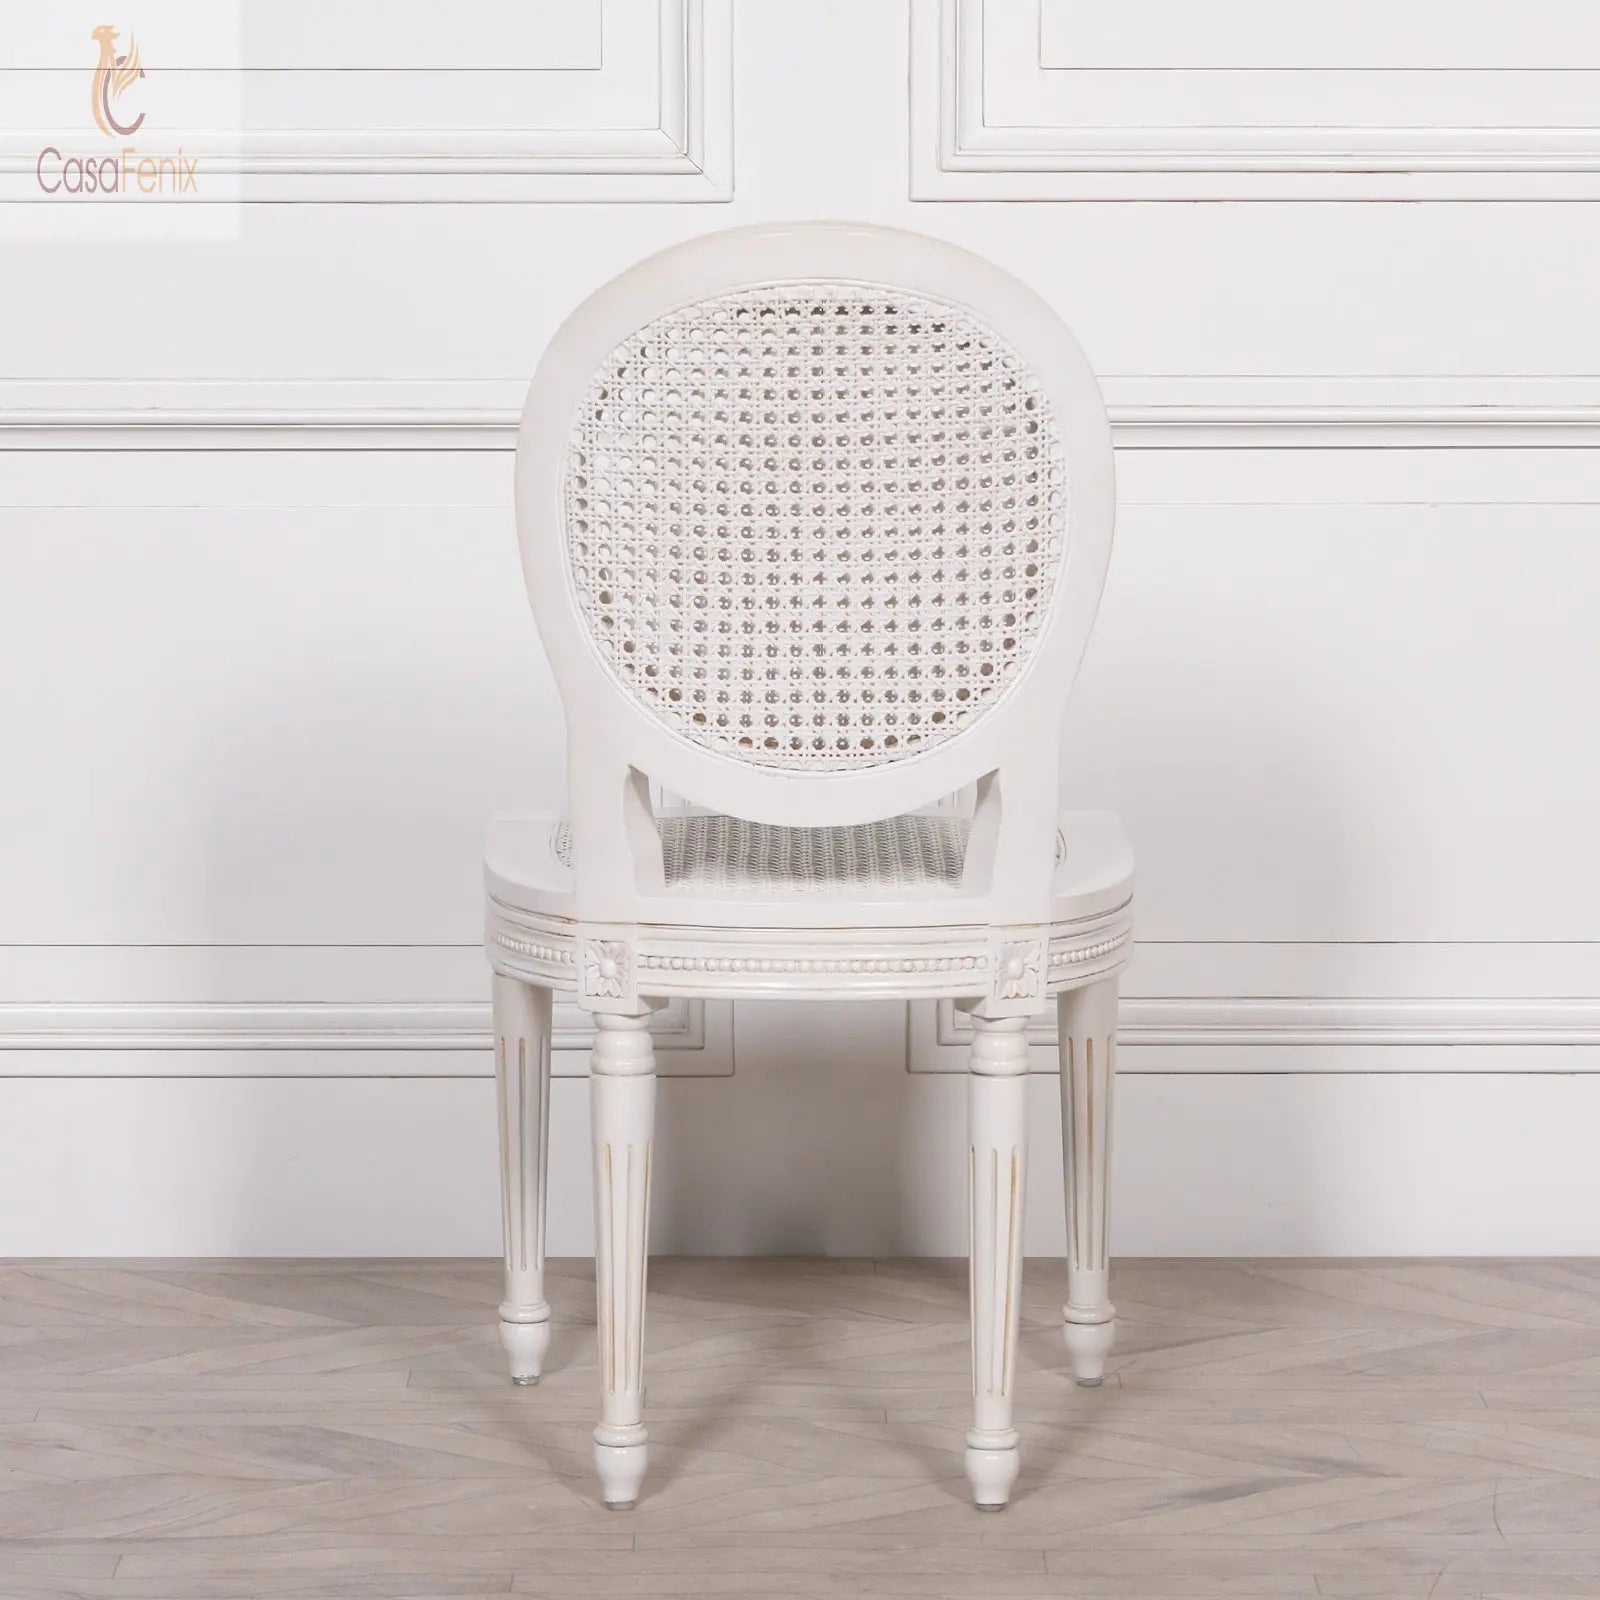 White Chateau Carved Dining Chair Rattan Backrest Mahogany Wood - CasaFenix